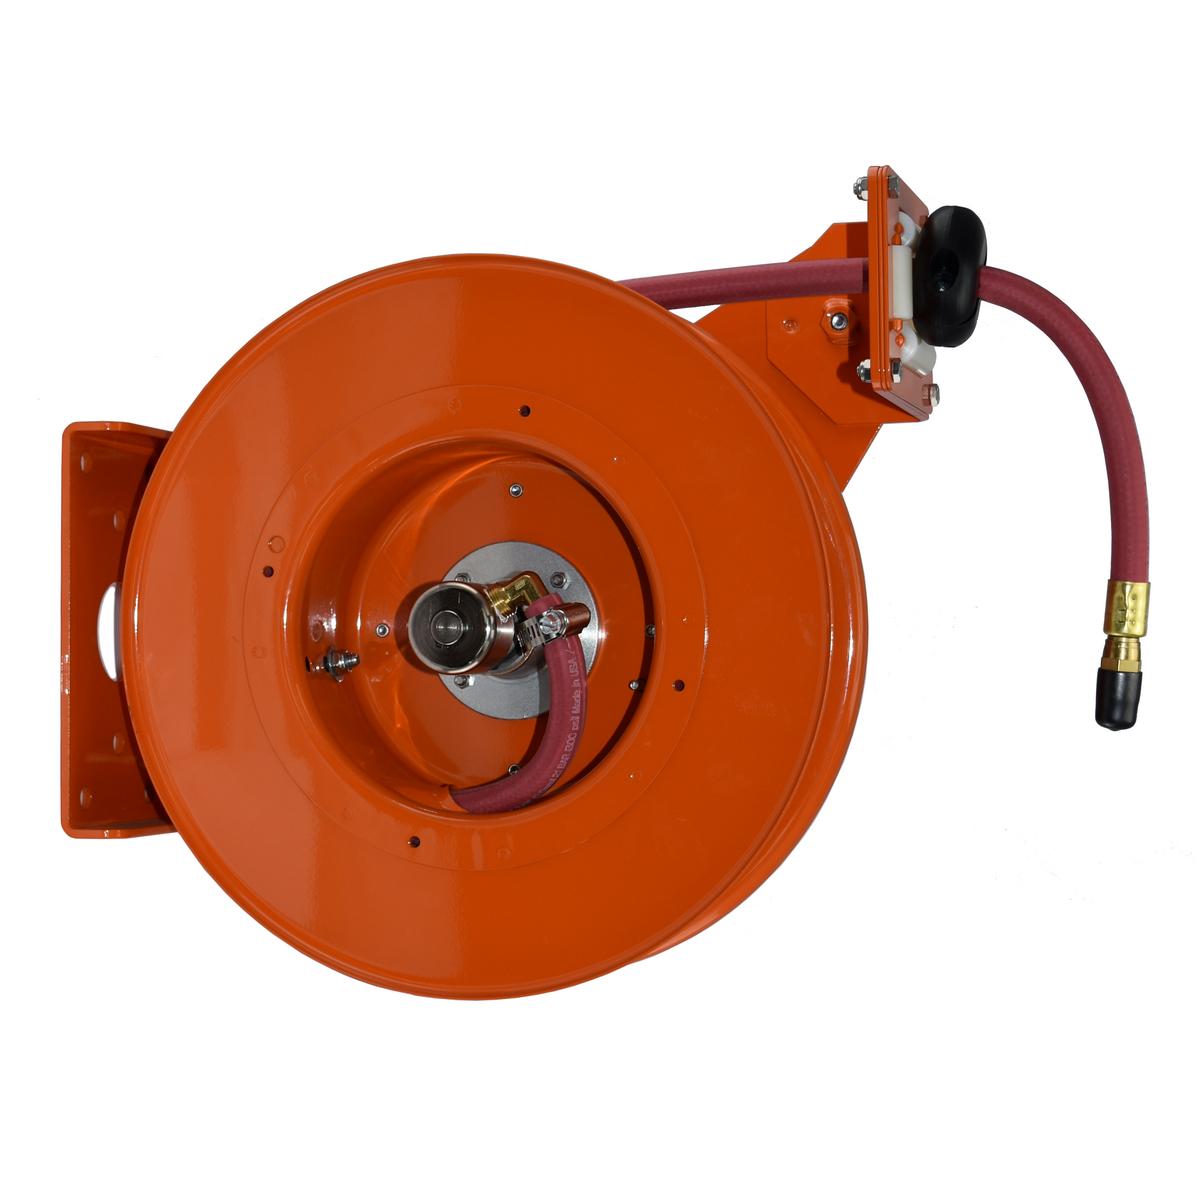 Hubbell HM142-4-P2 The Gleason Hose-Master hose reel is the most rugged single hose, general purpose hose reel of its size in the industry. We created it with the most demanding hose reeling applications in mind, hand pull or machine mounted. Oversized bearings and a heavy 